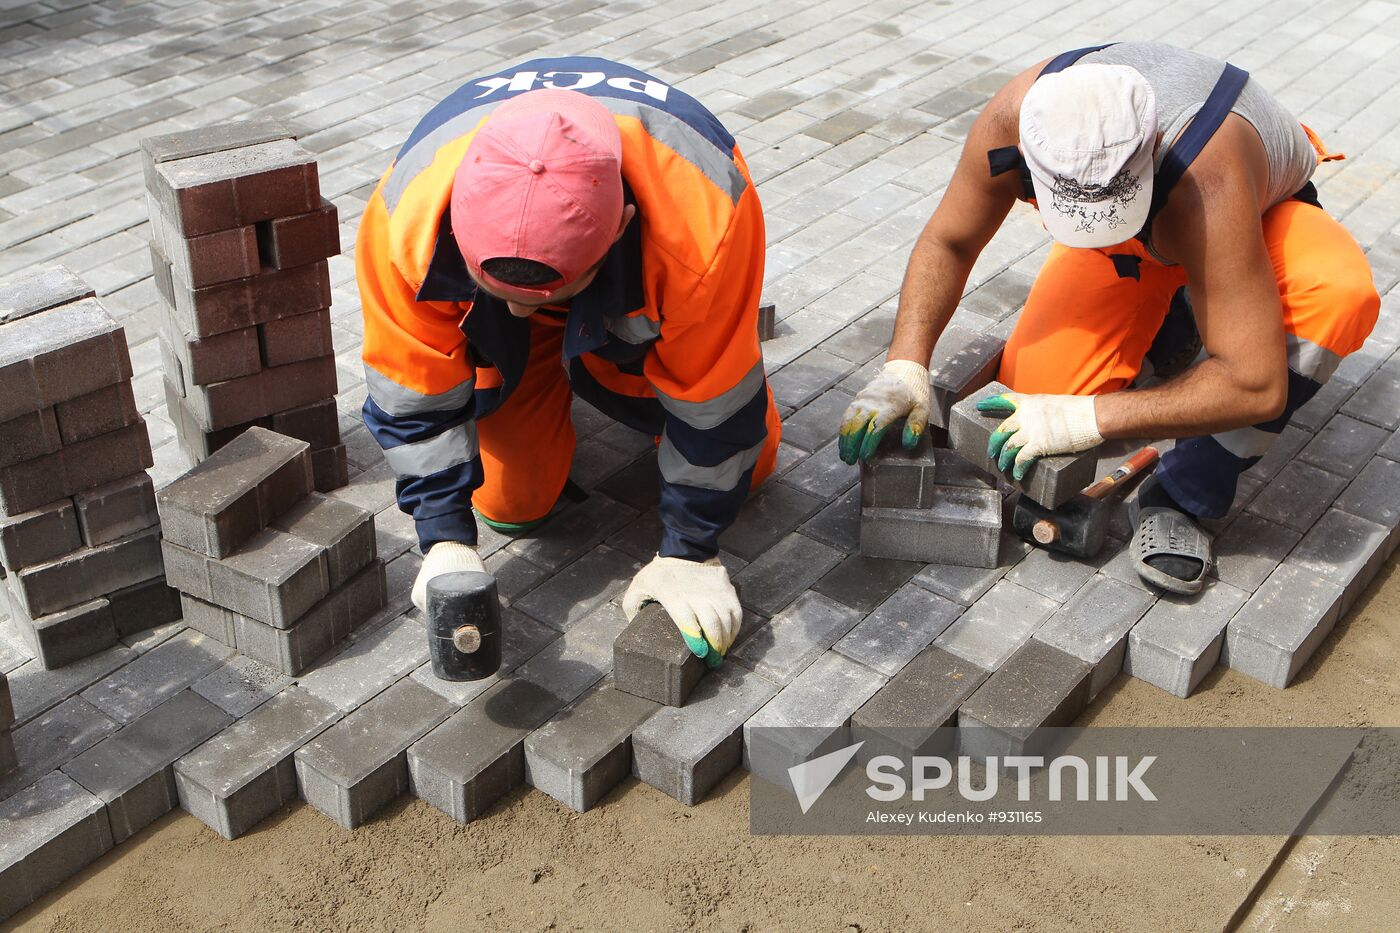 Laying down paving slabs in Moscow